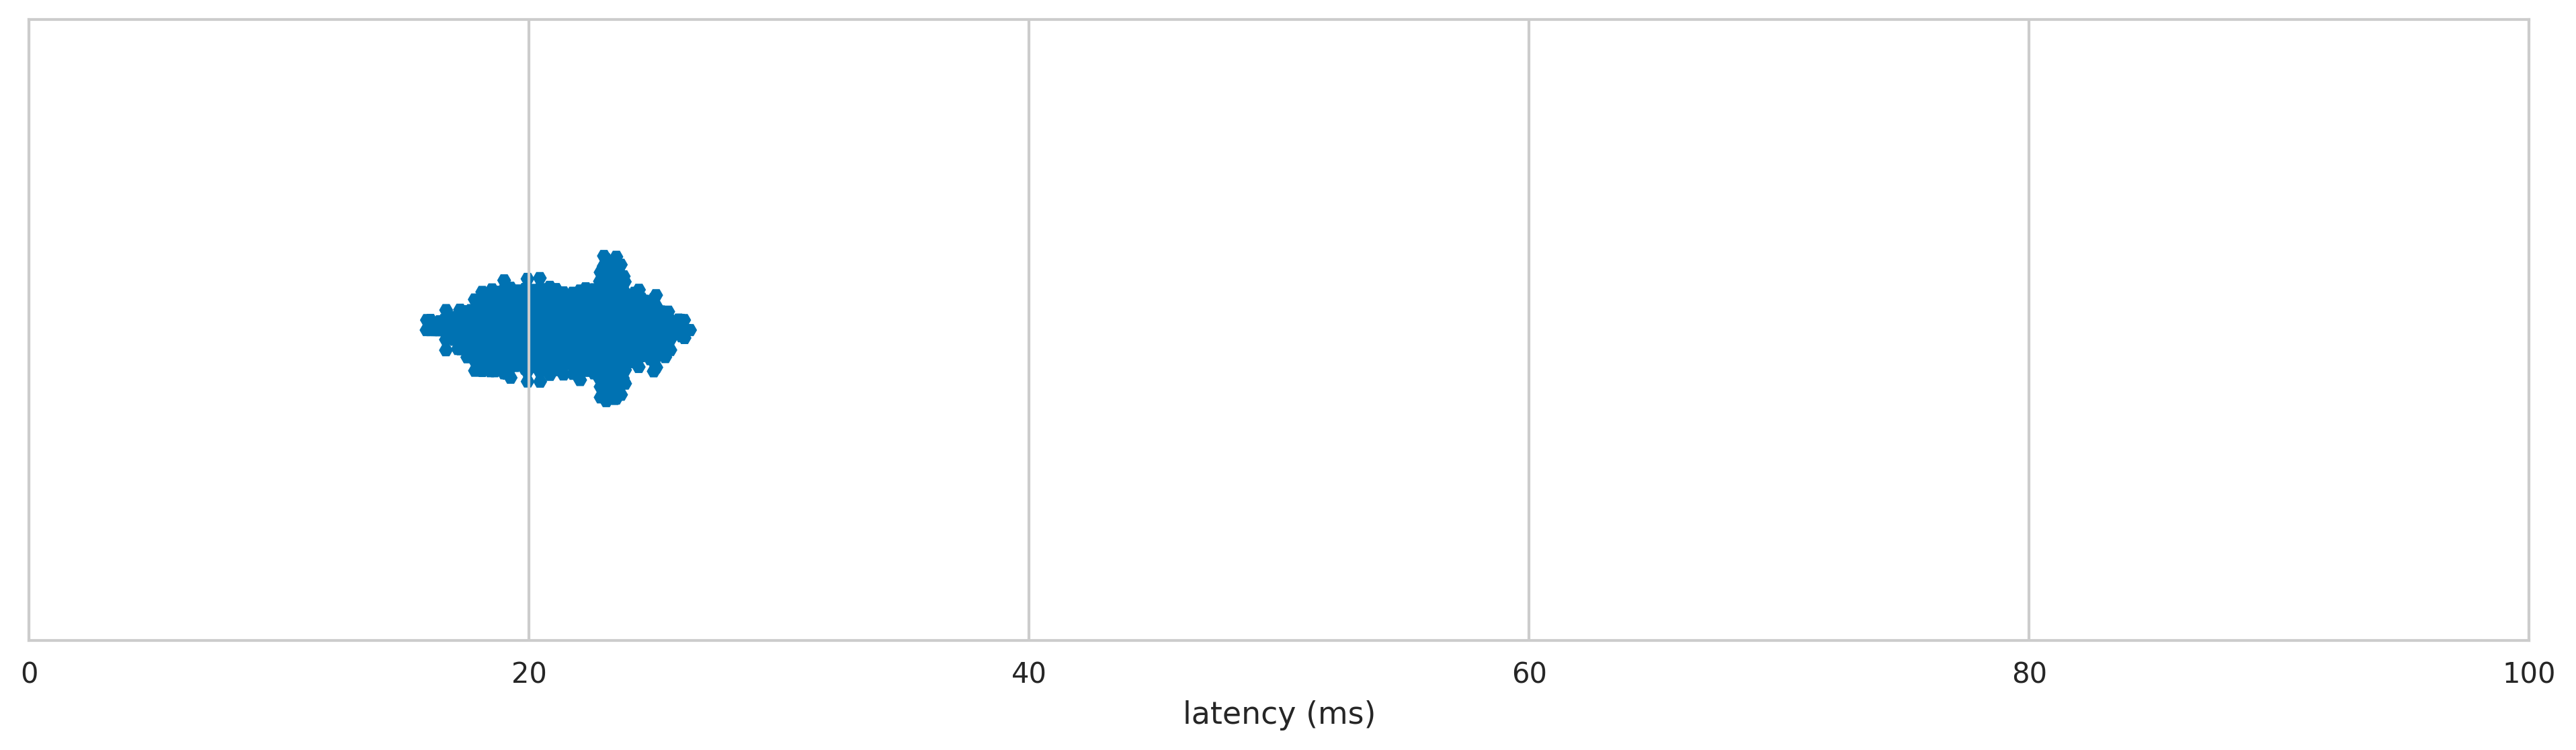 MS-TECH Laser Game Mouse latency distribution 